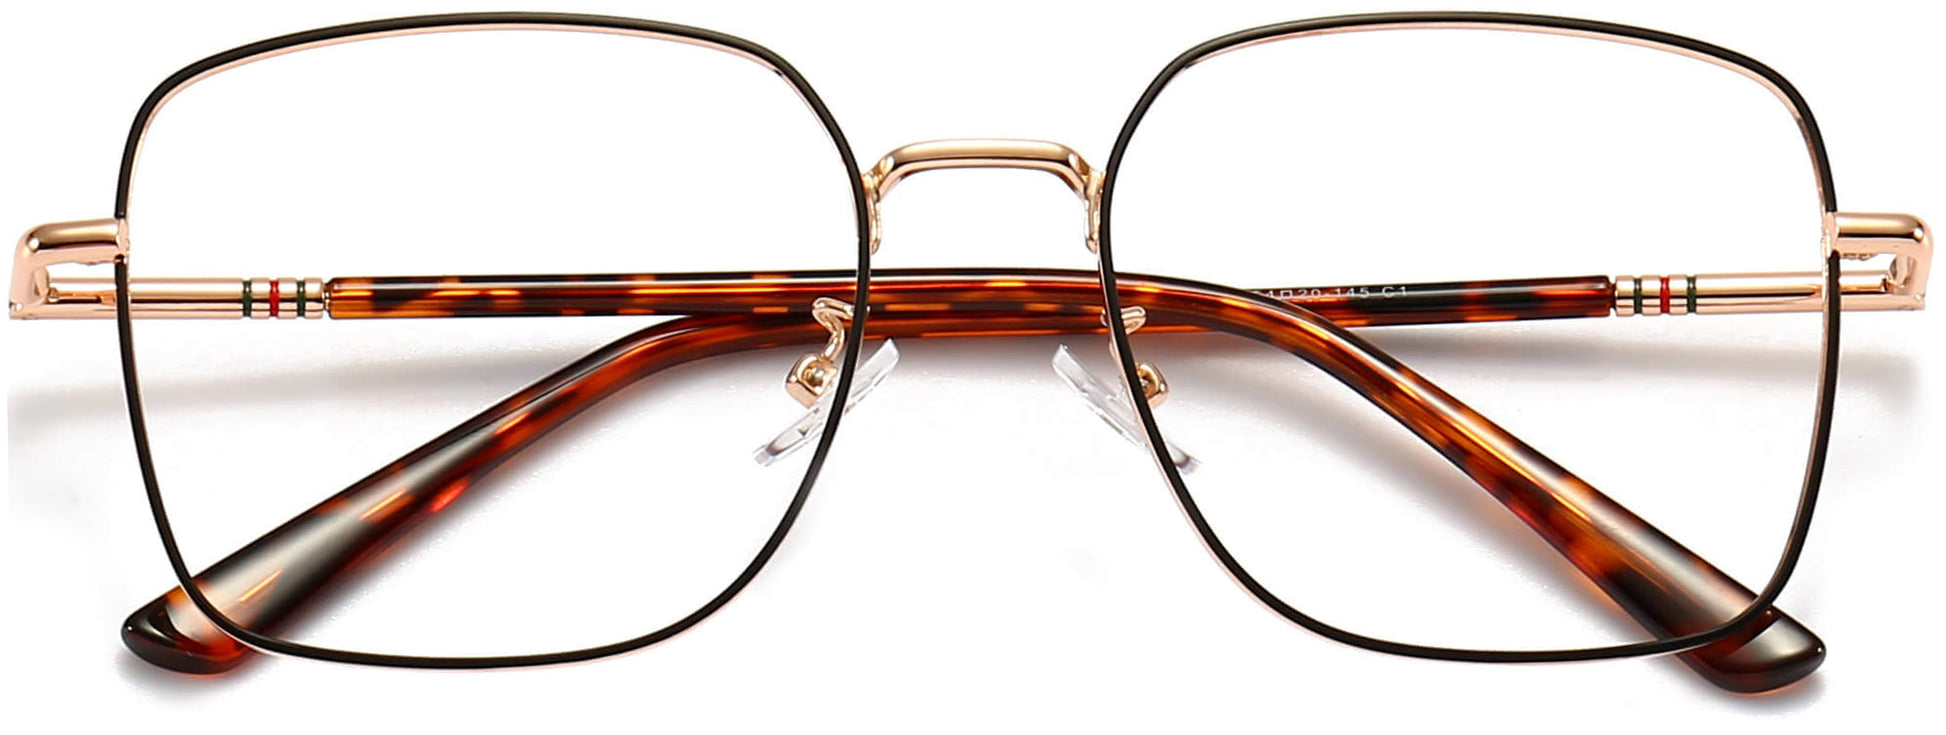 Marvin Square Black Eyeglasses from ANRRI, closed view